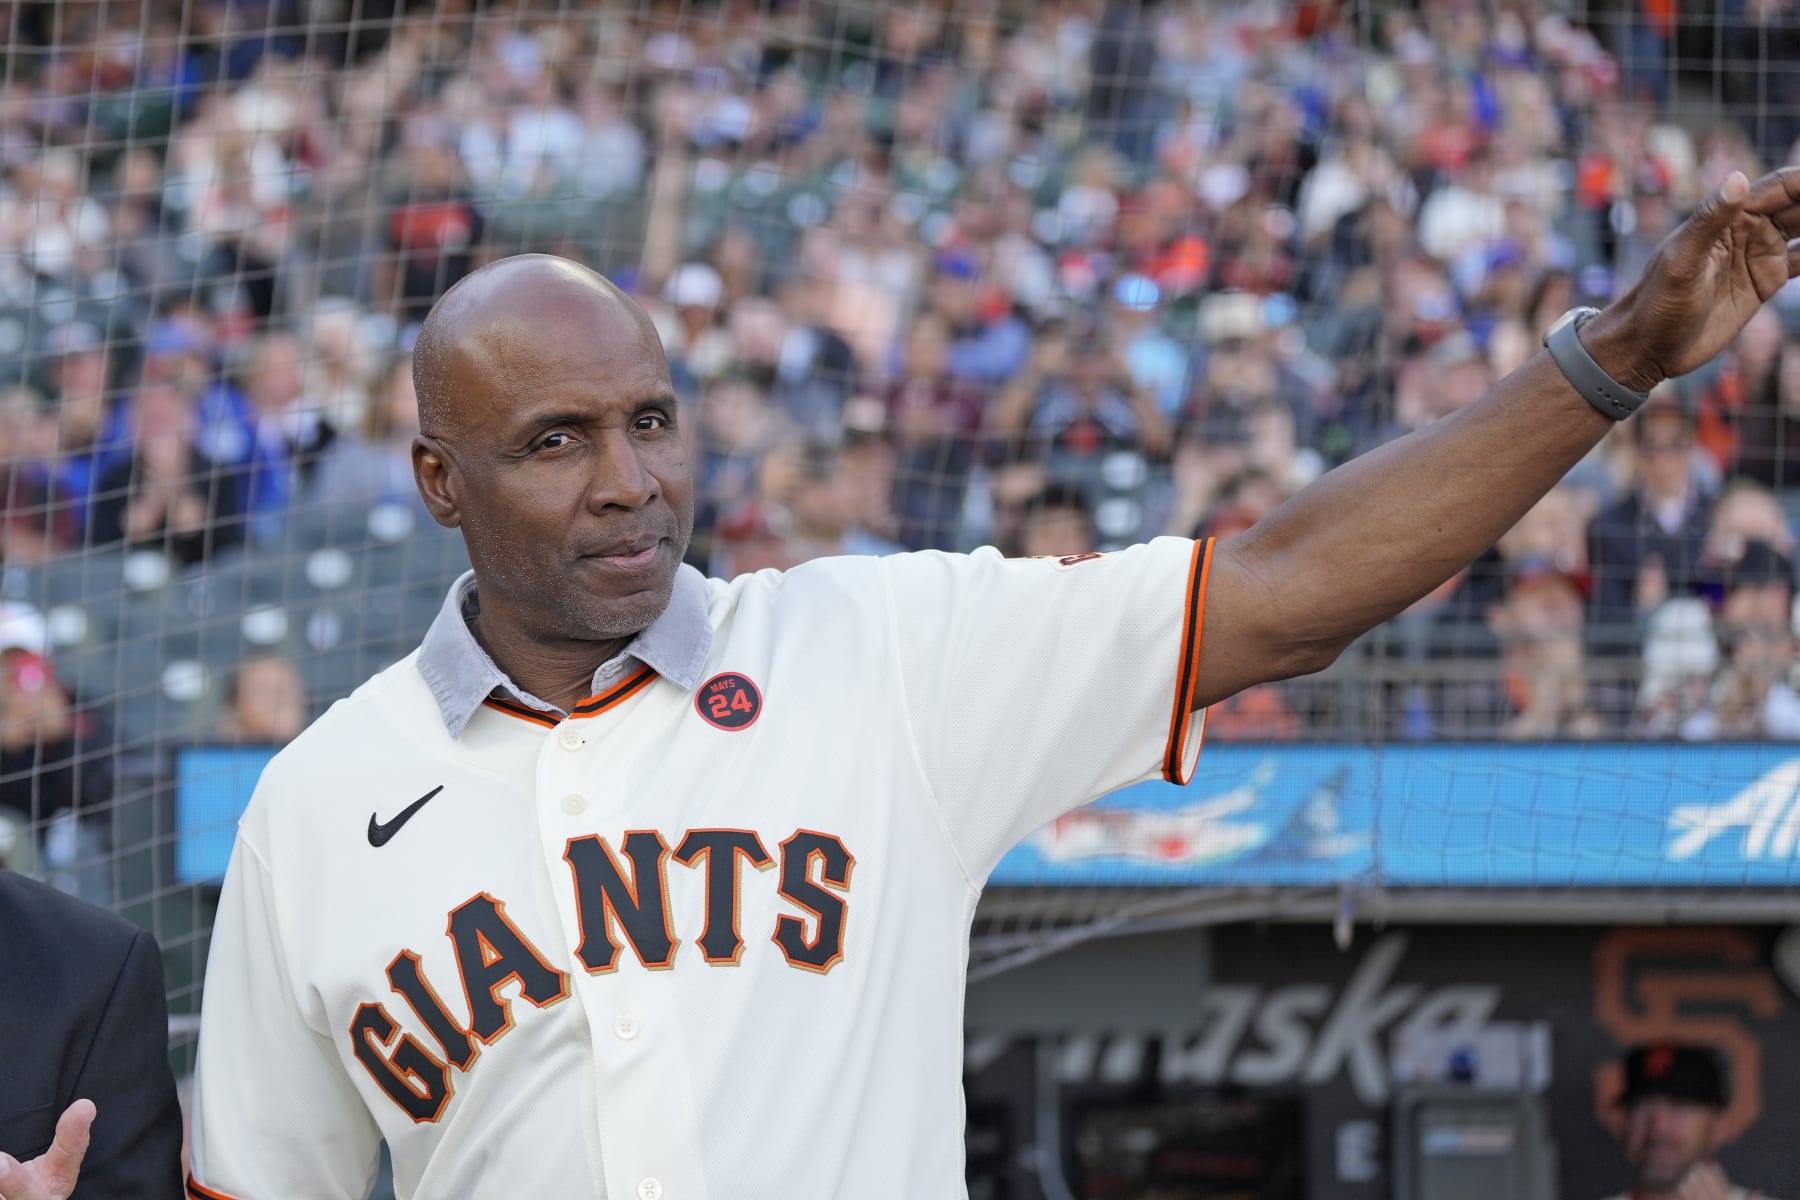 Worn World Series jersey and historic bat of MLB legend Barry Bonds sold for 5,000